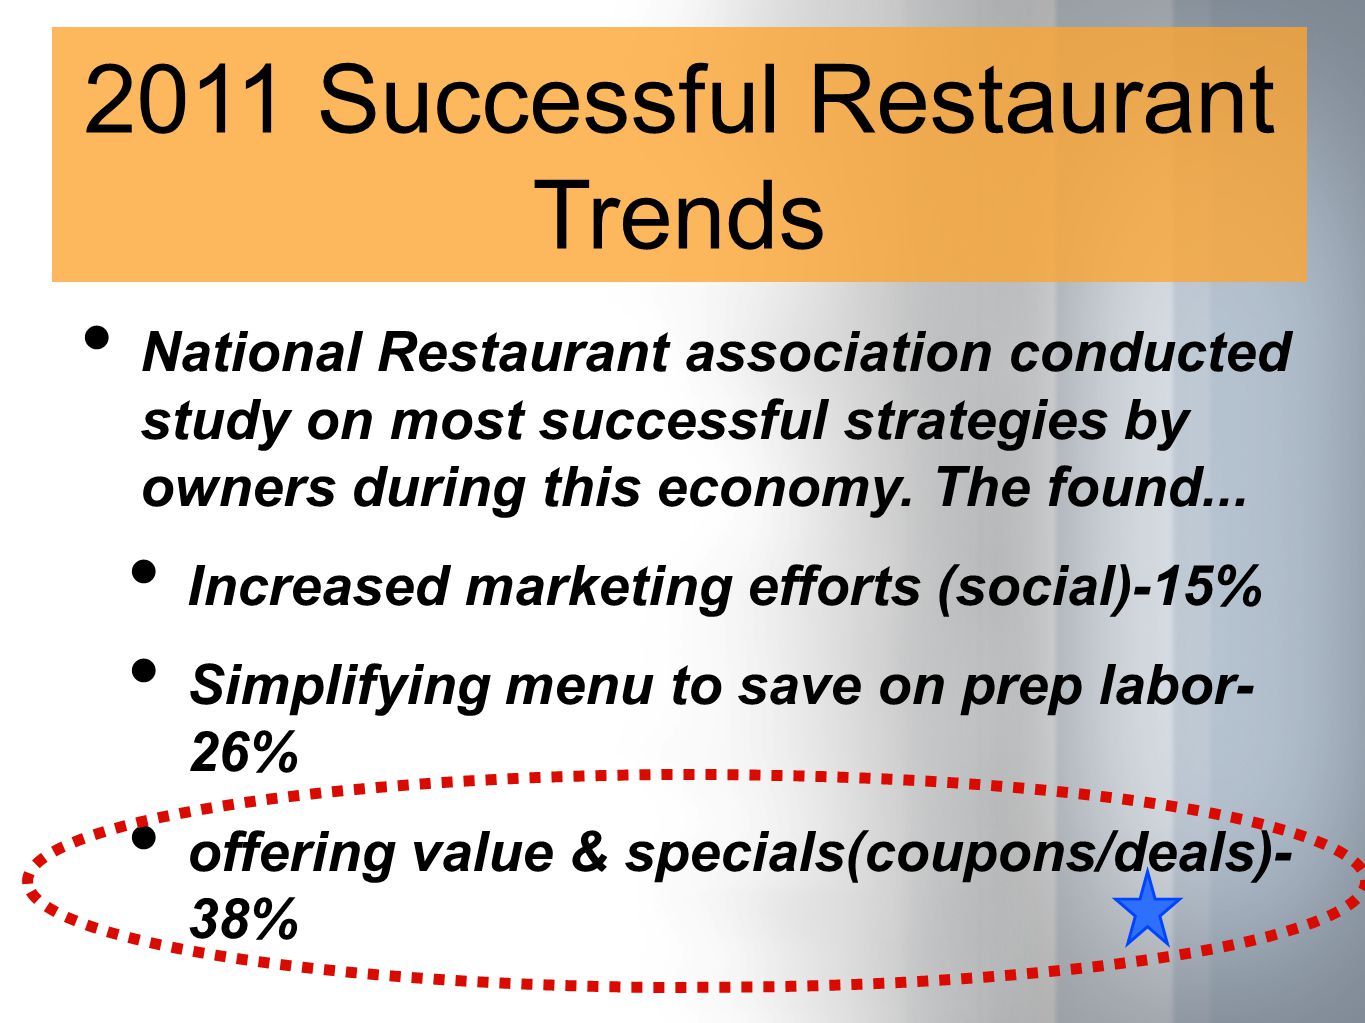 2011 Successful Restaurant Trends National Restaurant association conducted study on most successful strategies by owners during this economy.